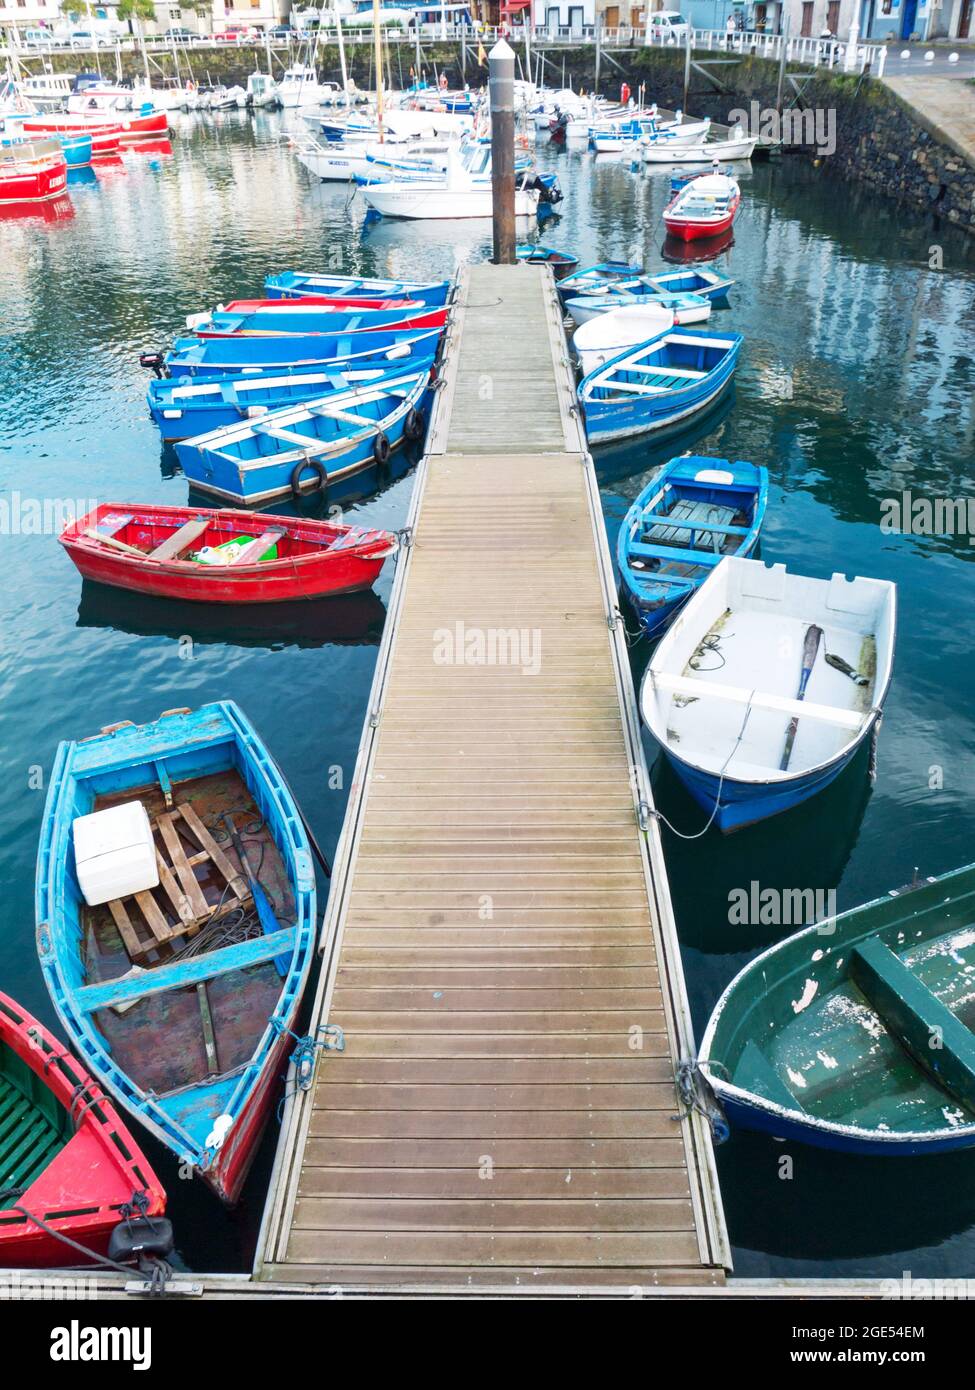 LUARCA, SPAIN - DECEMBER 4, 2016: Colorful boats at the fish market pier in Luarca, Spain. Stock Photo